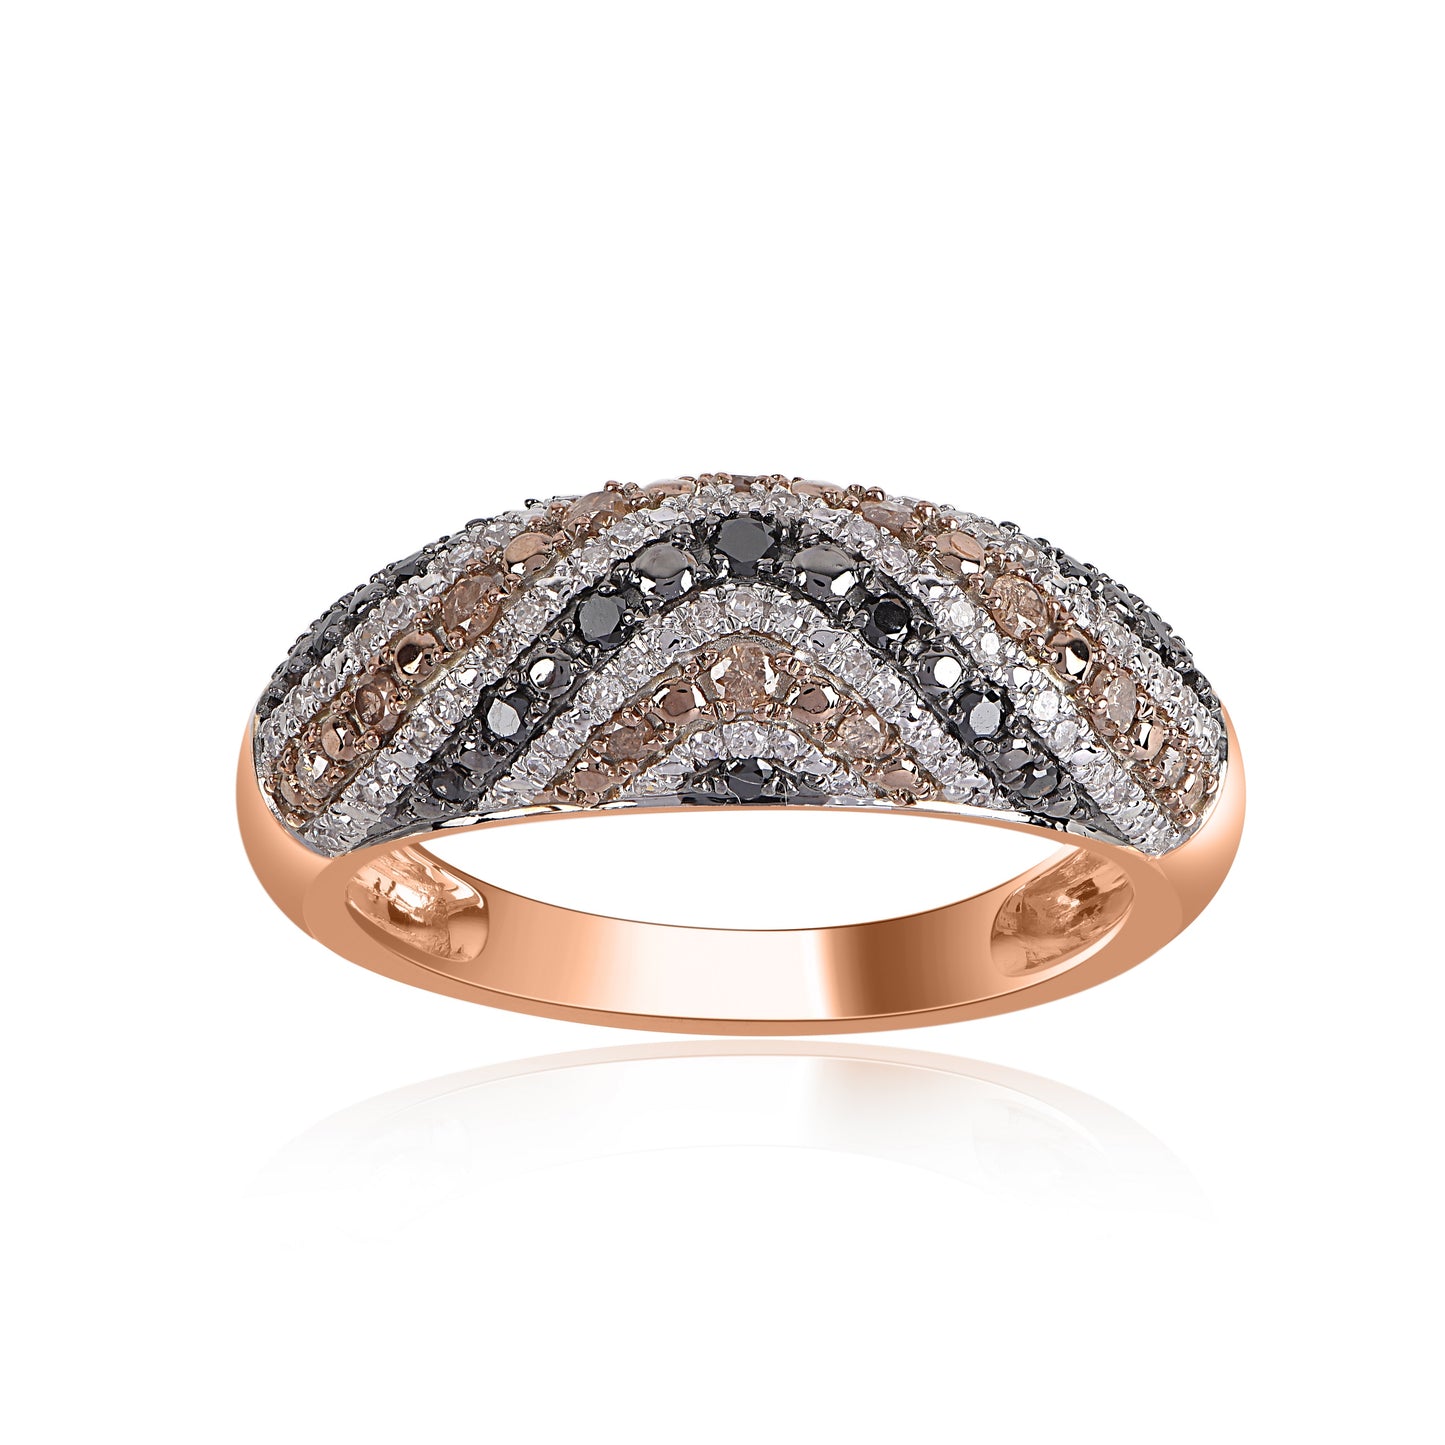 Treated Black and Natural Cognac Diamonds Wedding Band in 14K Gold